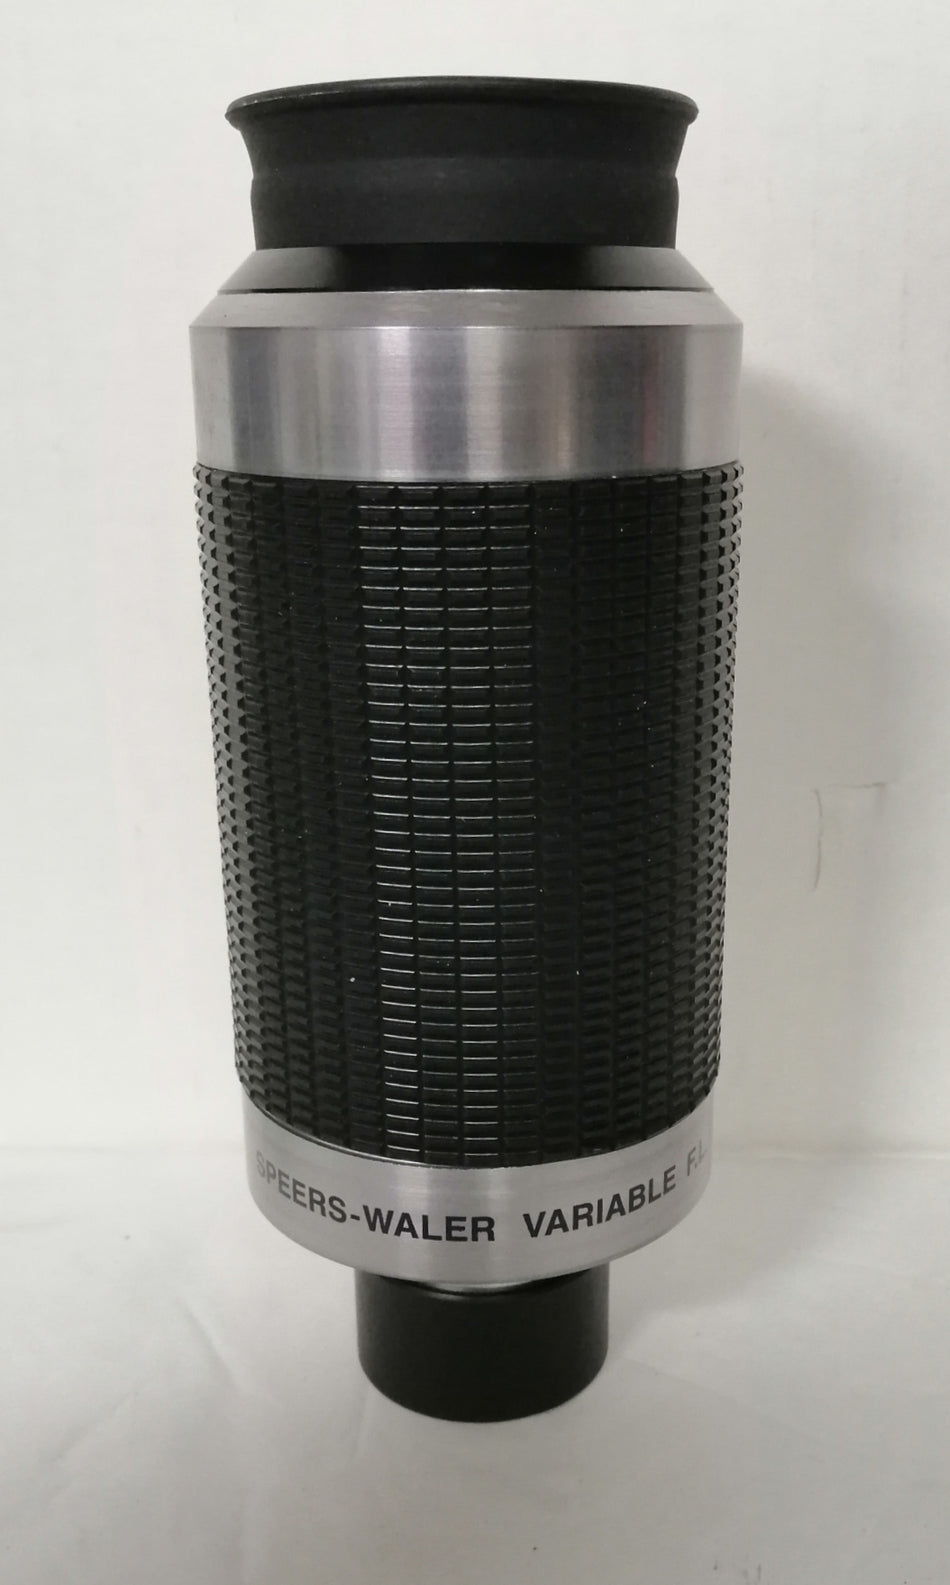 ANTARES 8.5-12mm SWEERS-WALER SWA - VARIABLE FOCAL LENGTH EYEPIECE (Preowned)